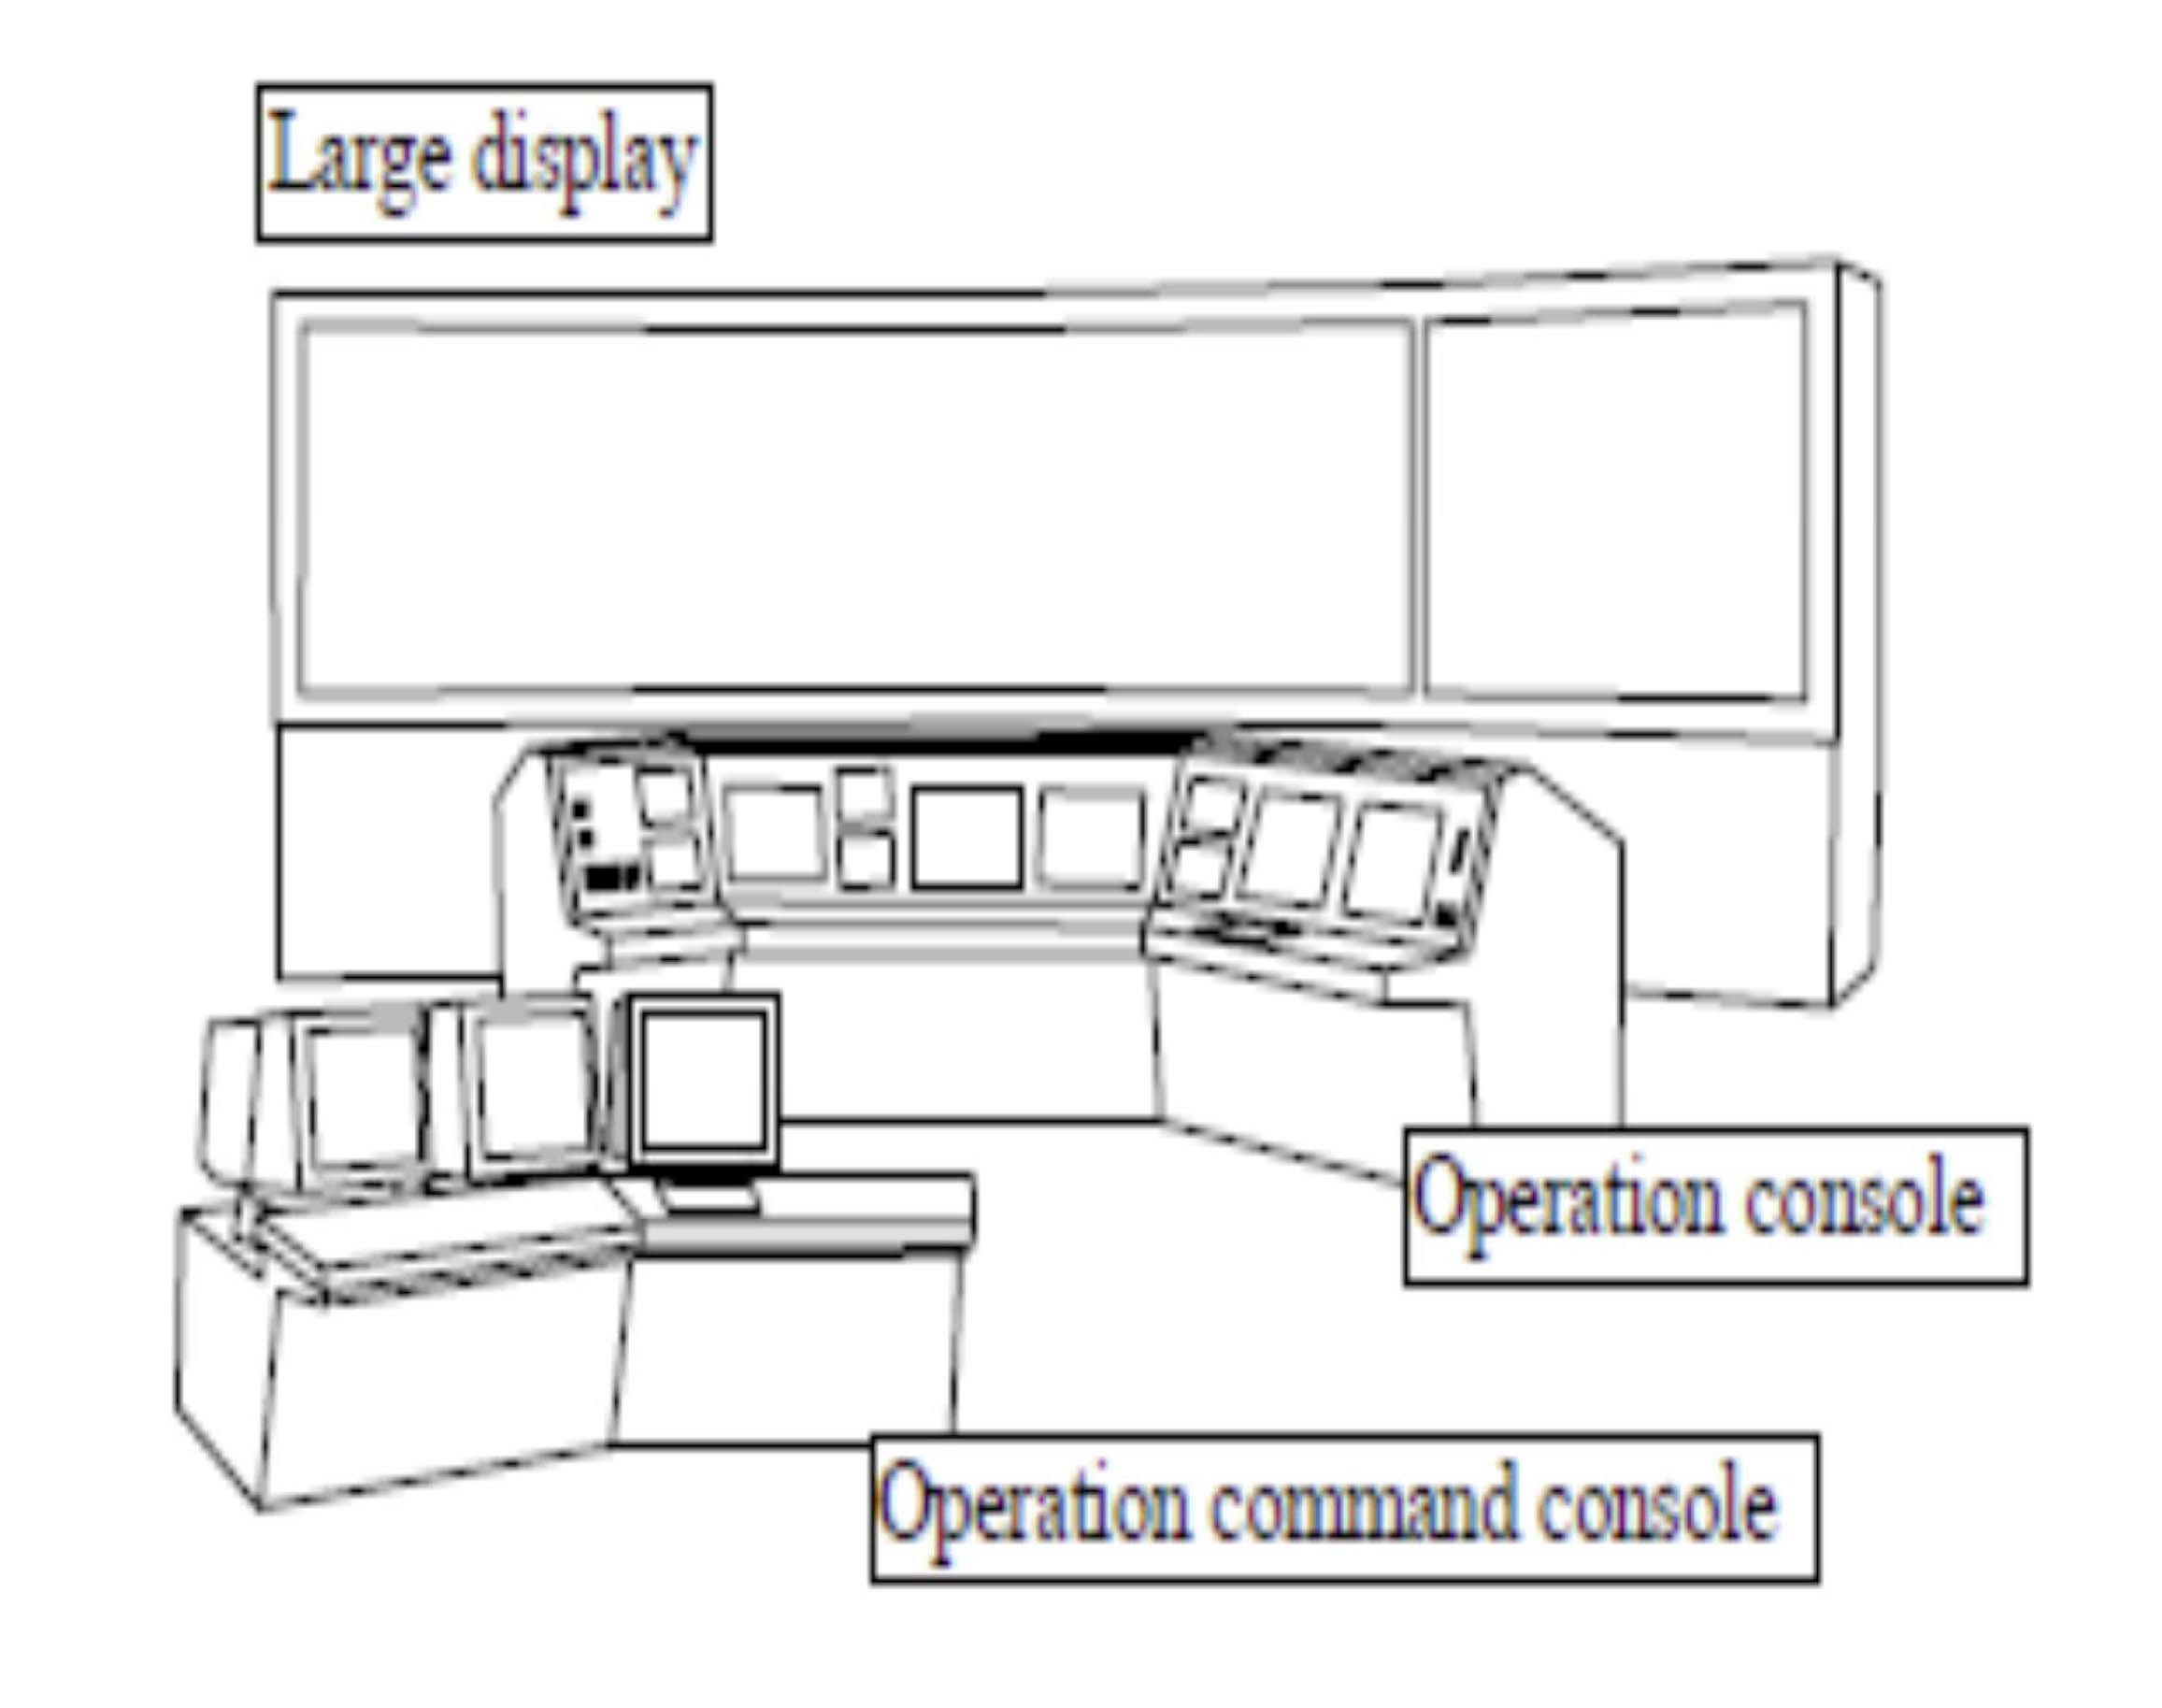 An Example Configuration of Computerized Humanmachine Interface for Monitoring and Operation